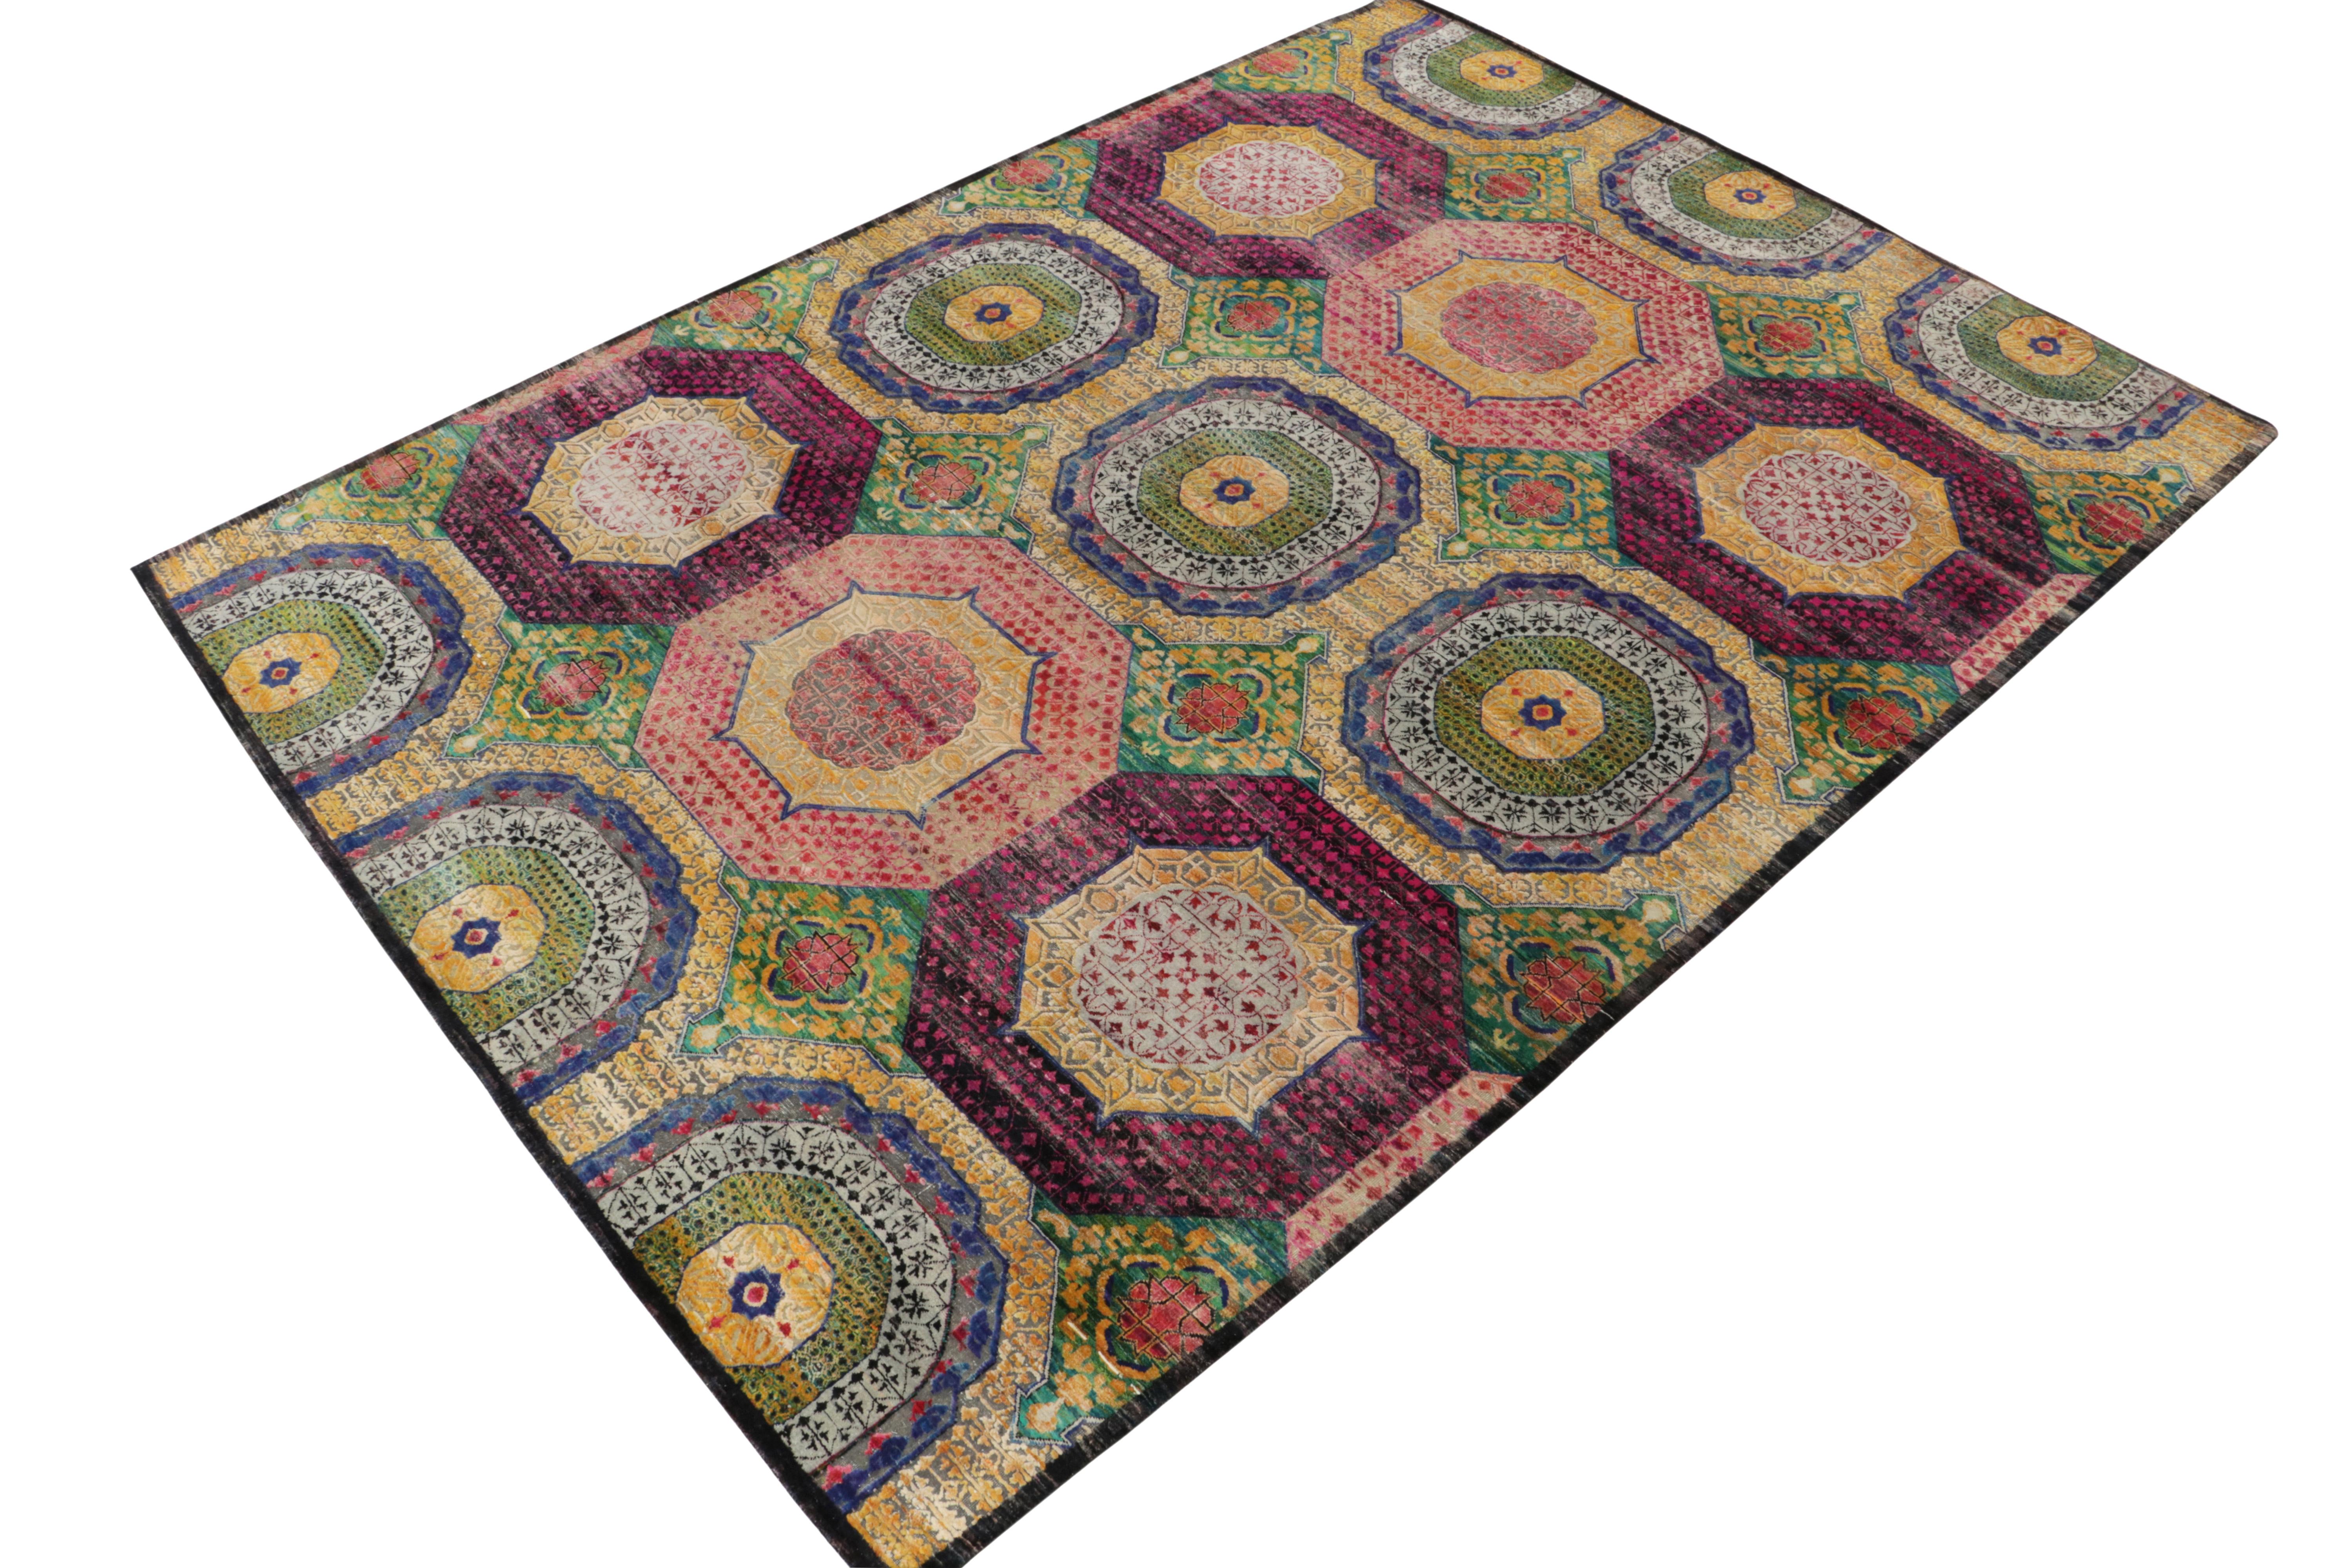 Hand knotted in fine quality wool & silk, a gorgeous 9x12 rug inspired by 17th century Indian designs.
On the Design: A favorite from our Modern Classics collection, the design depicts an elaborate Classic design in purple, blue, gold and green